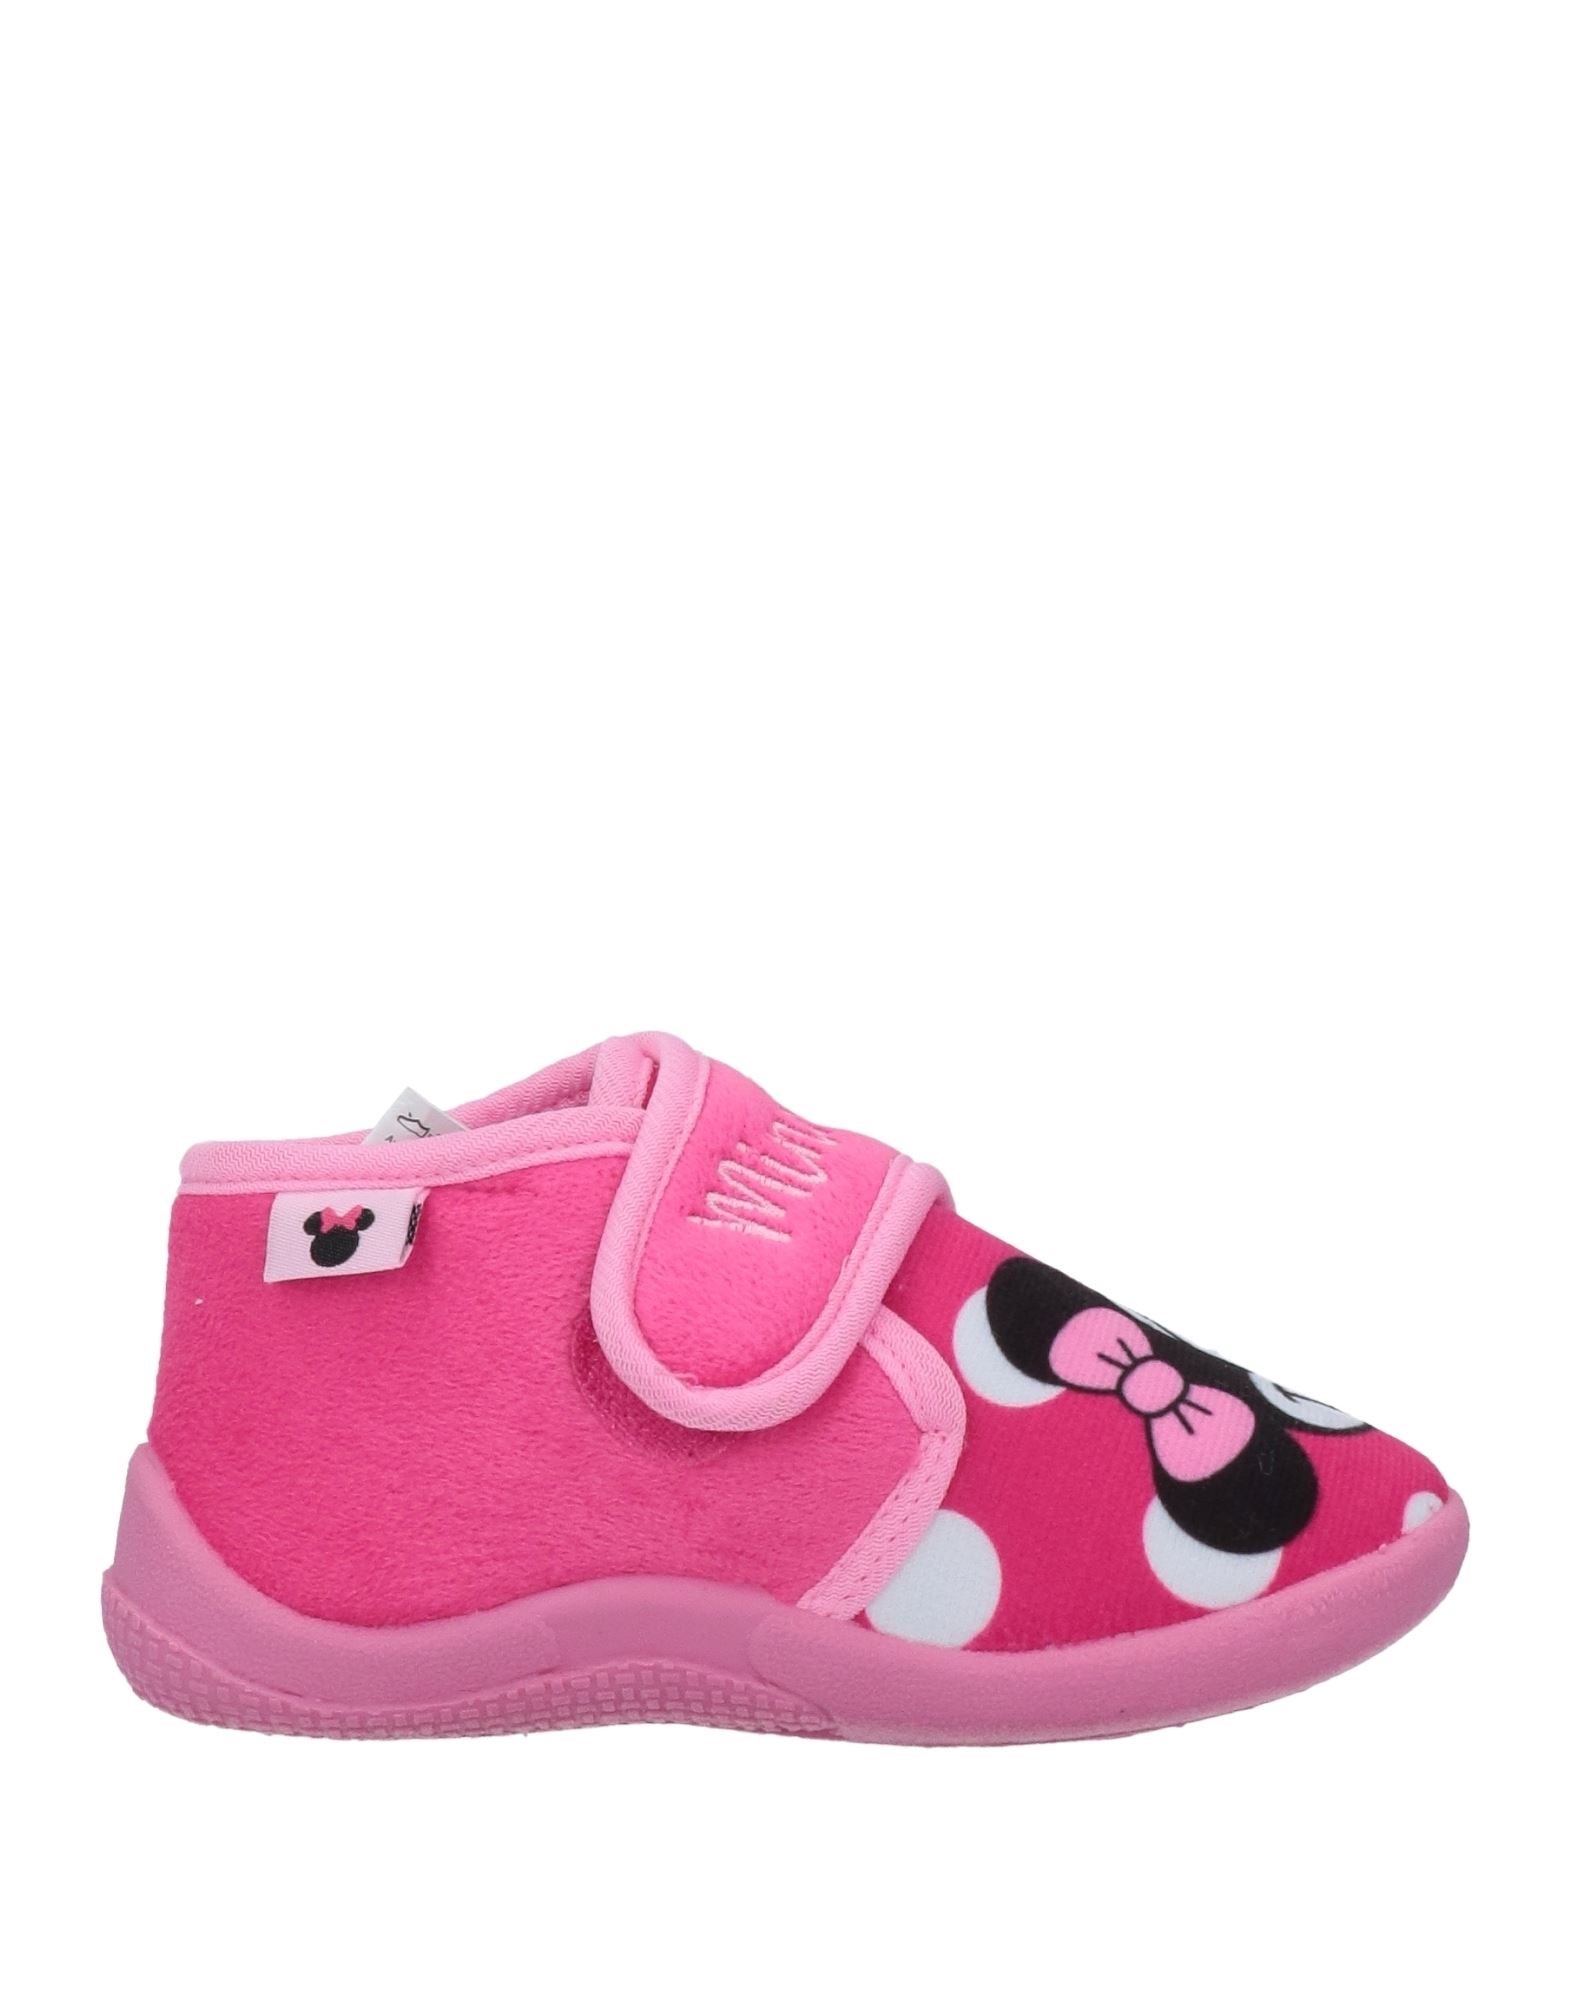 CHICCO Hausschuh Kinder Rosa von CHICCO